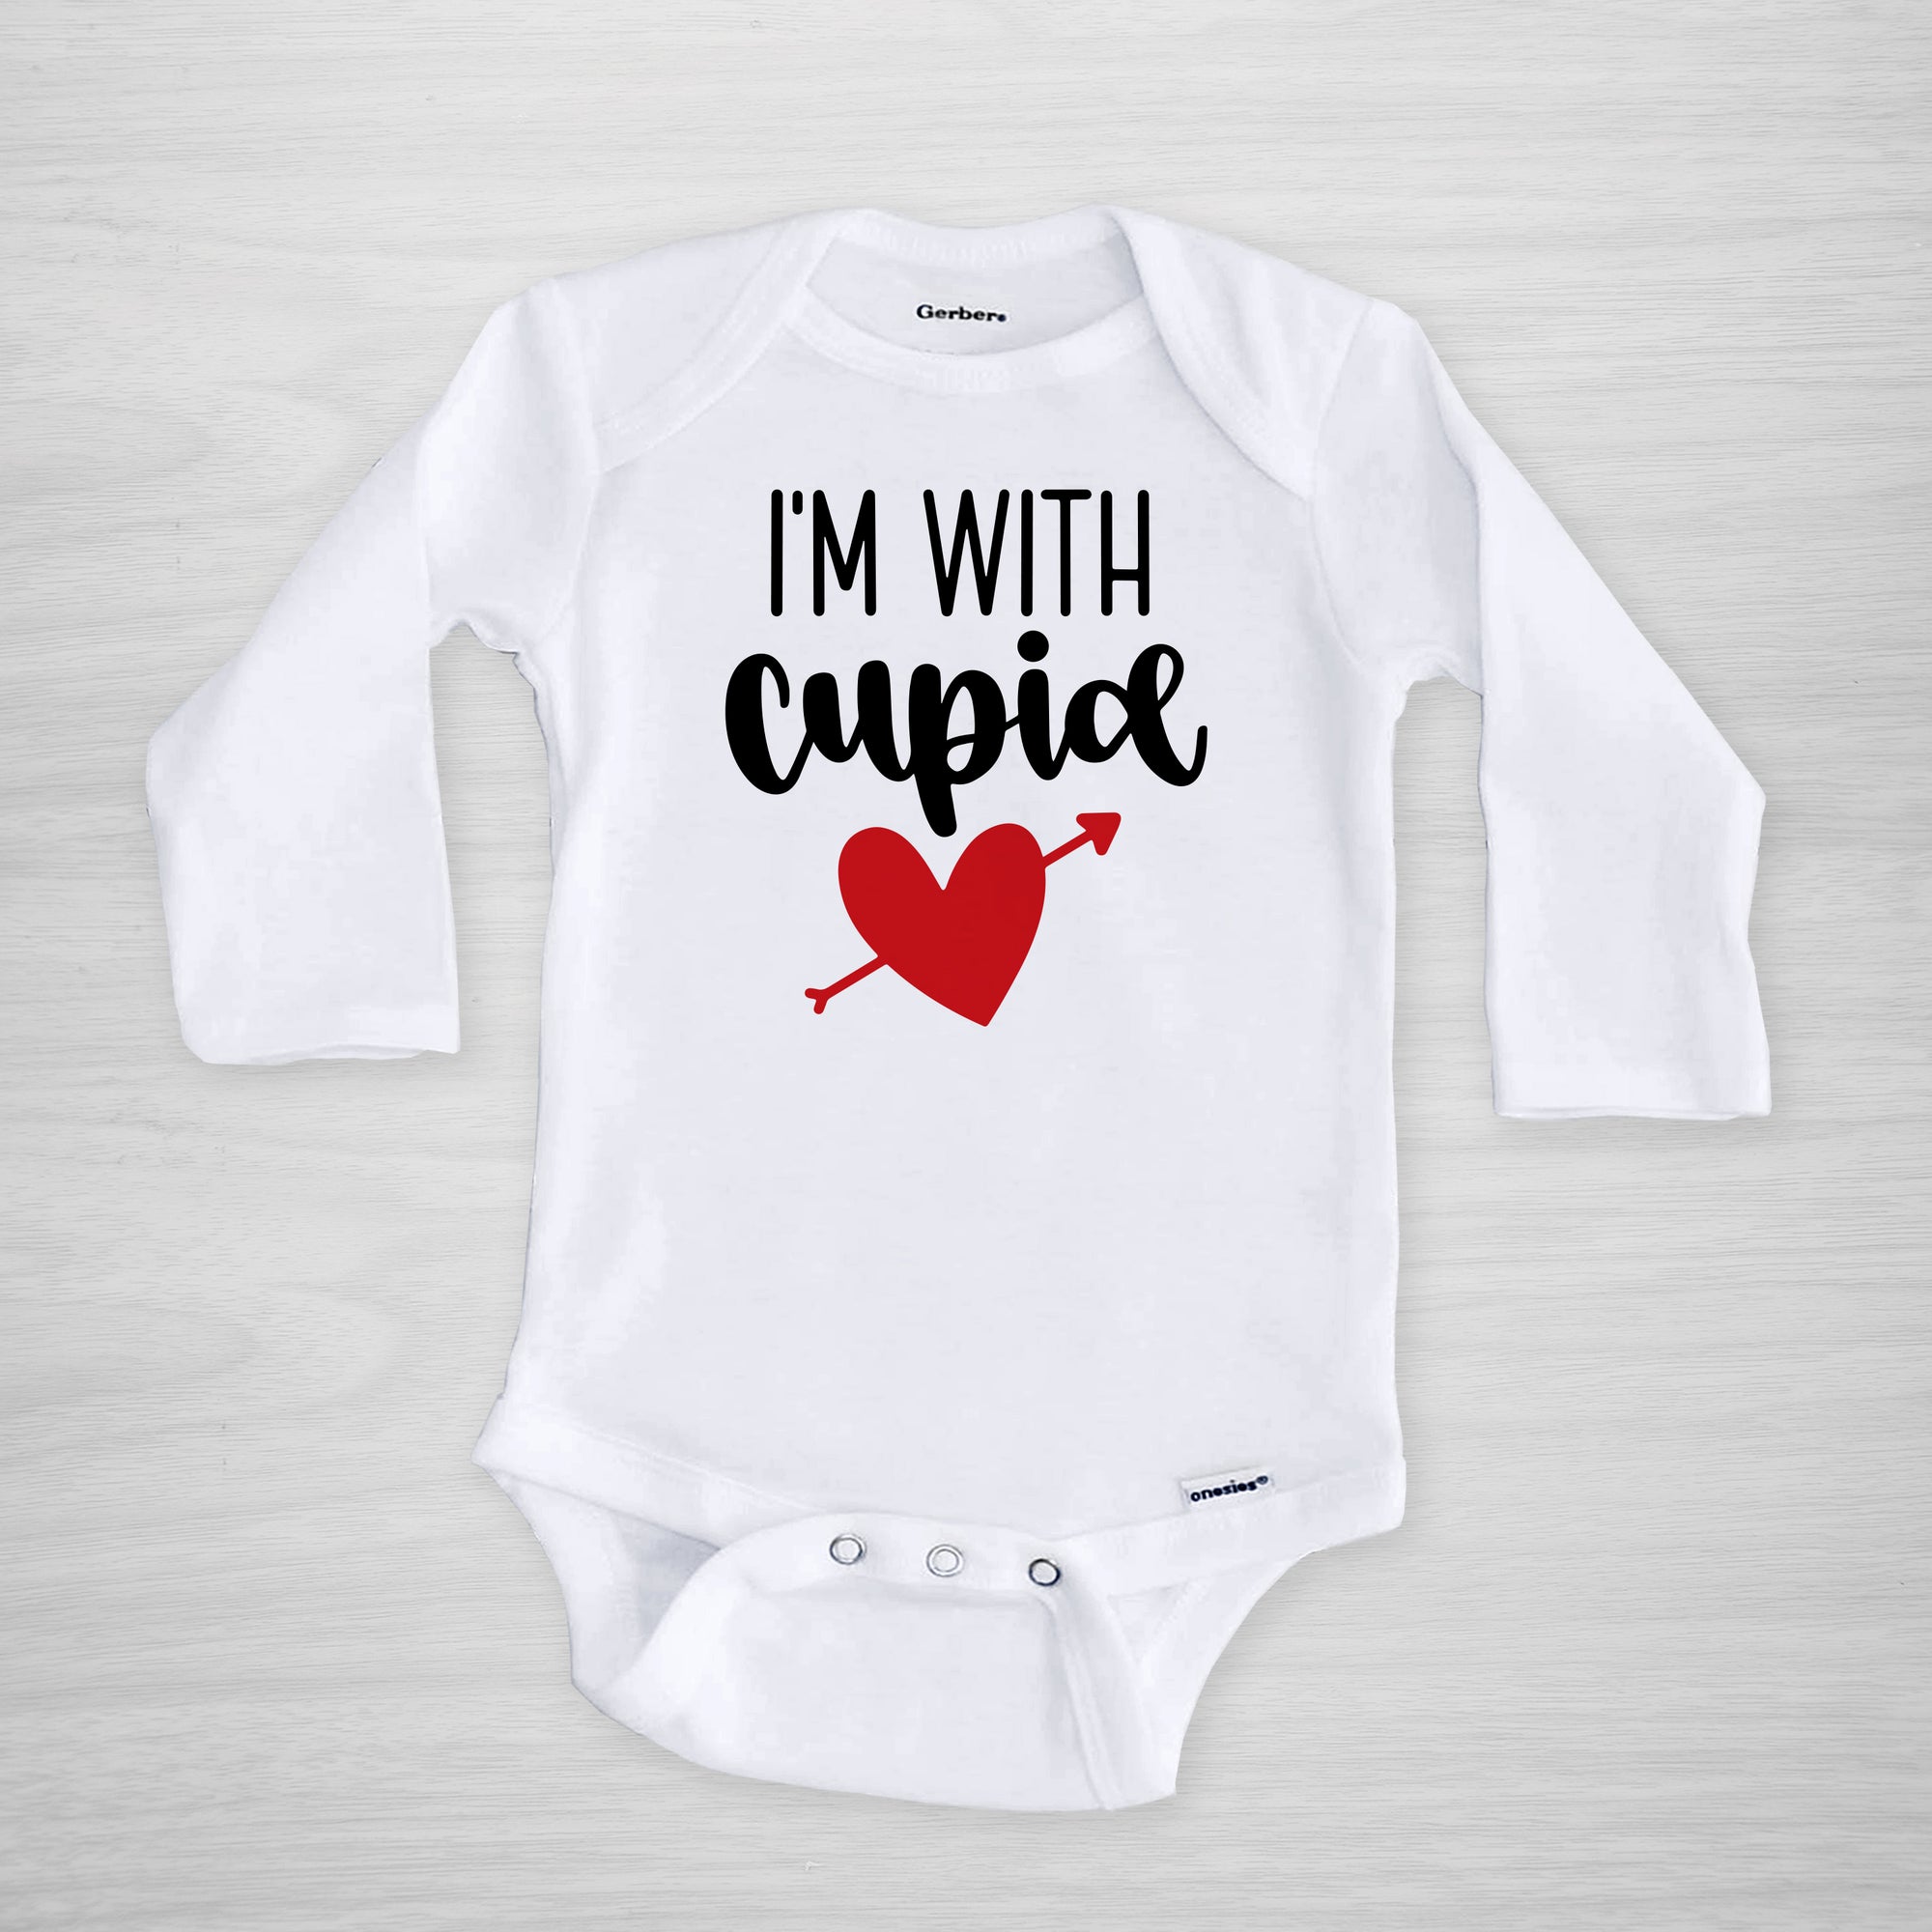 I'm with Cupid Valentine's day onesie, long sleeved